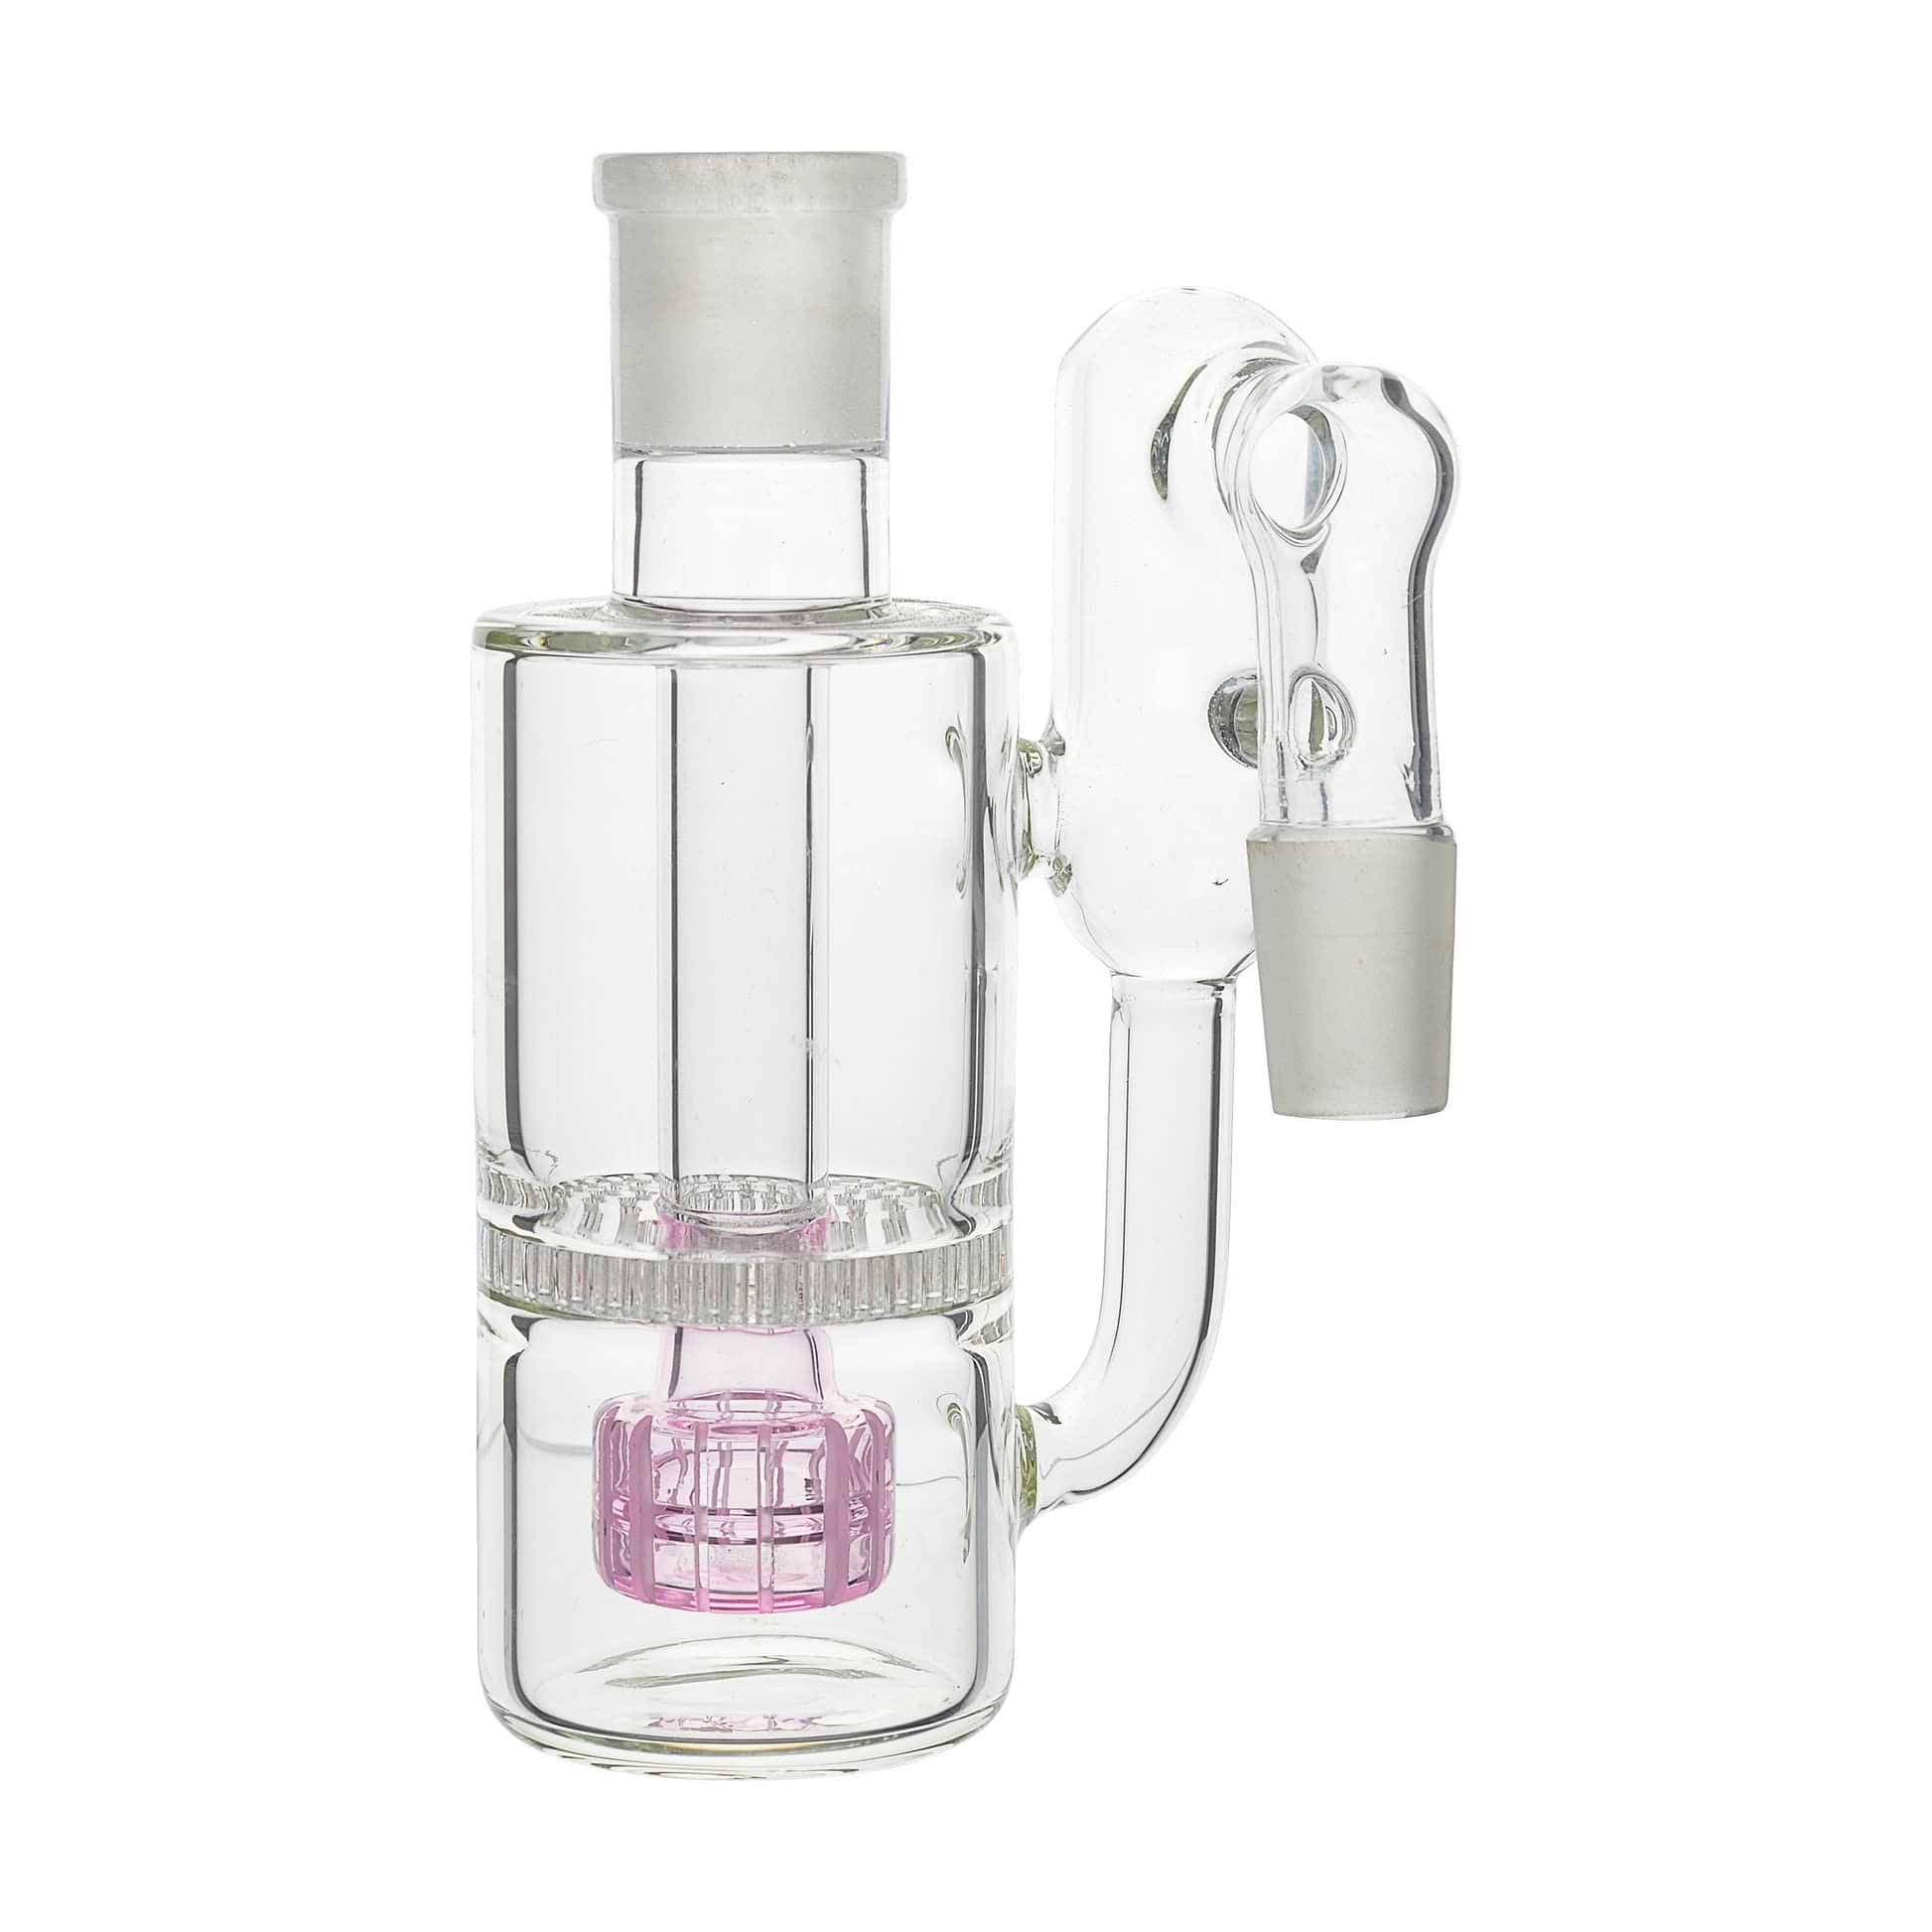 Full shot of pink and clear 6-inch ash catcher dab rig part for 18mm male cute perfume bottle look and design